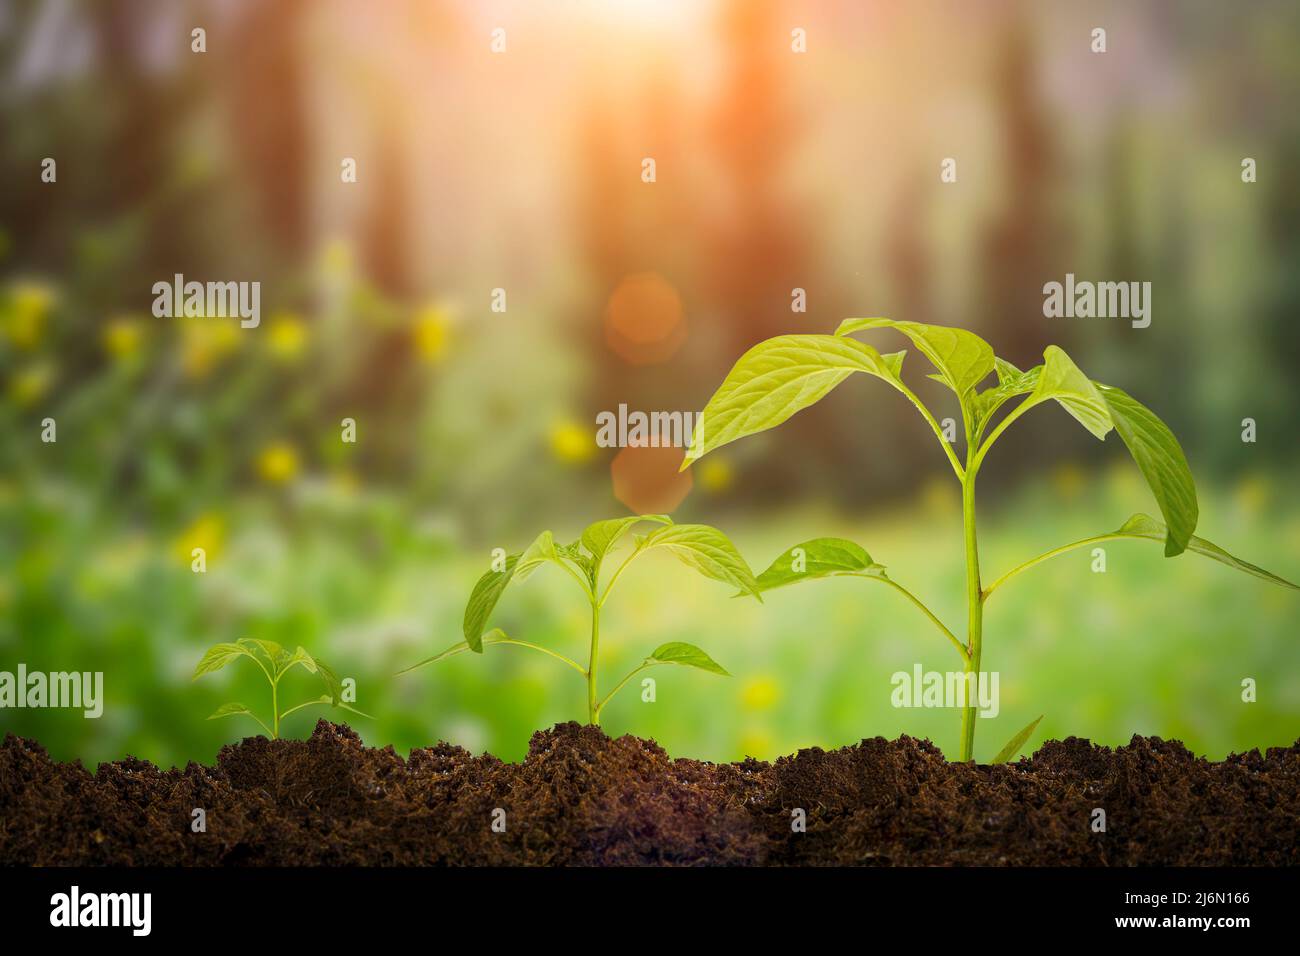 Growth green plants in the soil. Young sprout under nature sunlight. Renewable resources, environmental protection, agriculture, nature concept. High quality photo Stock Photo